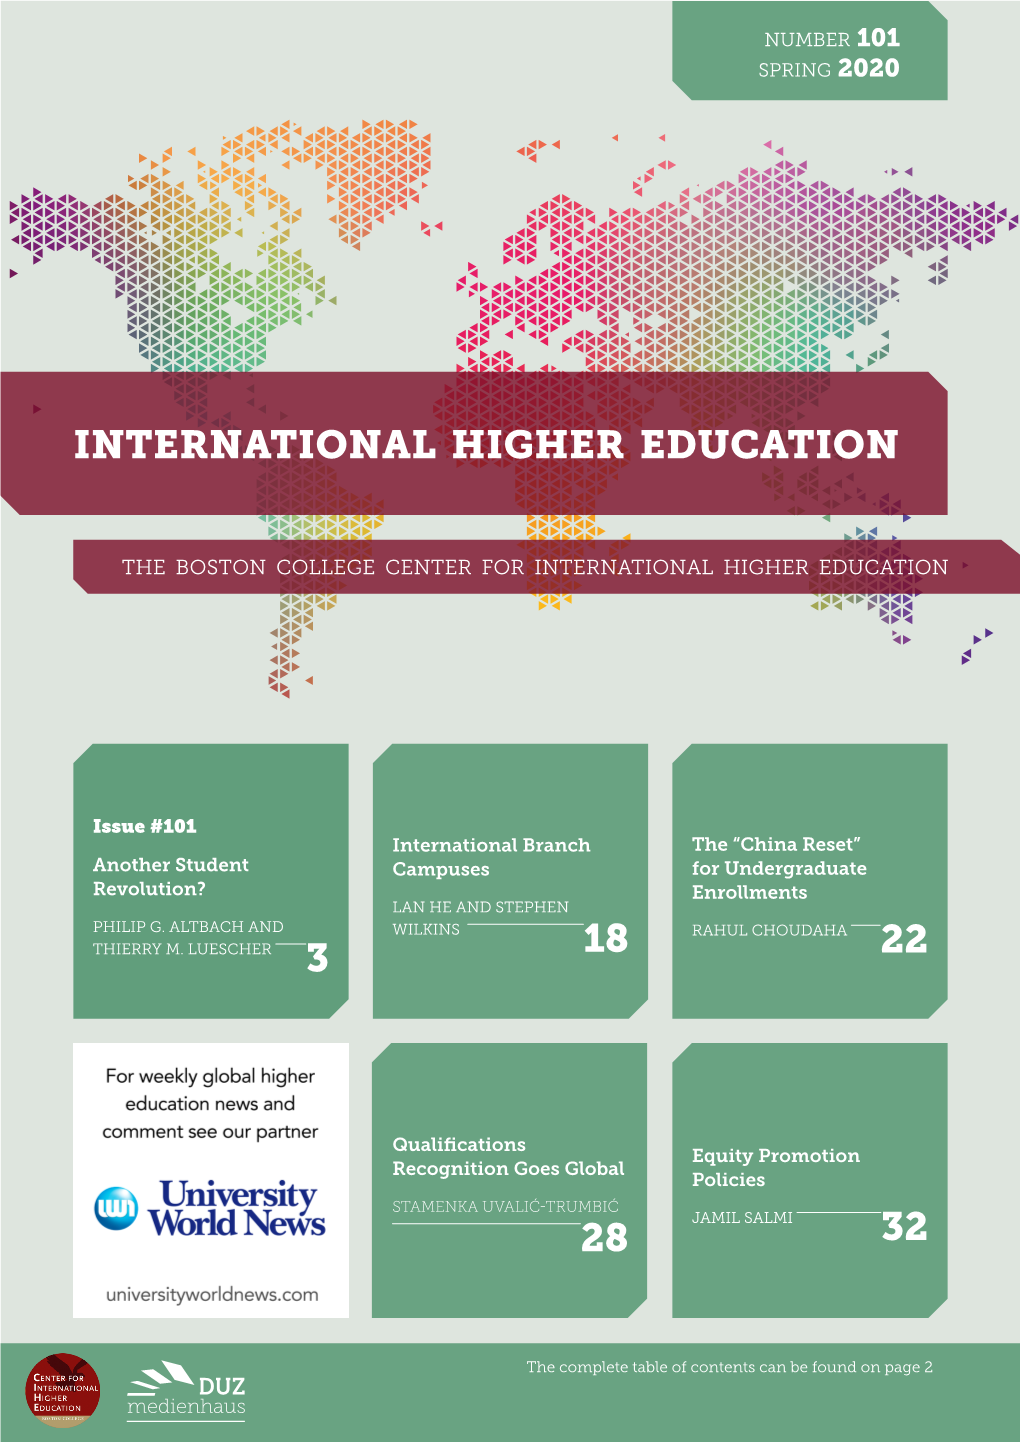 Internationalisation of Higher Education Developments in the European Higher Education Area and Worldwide